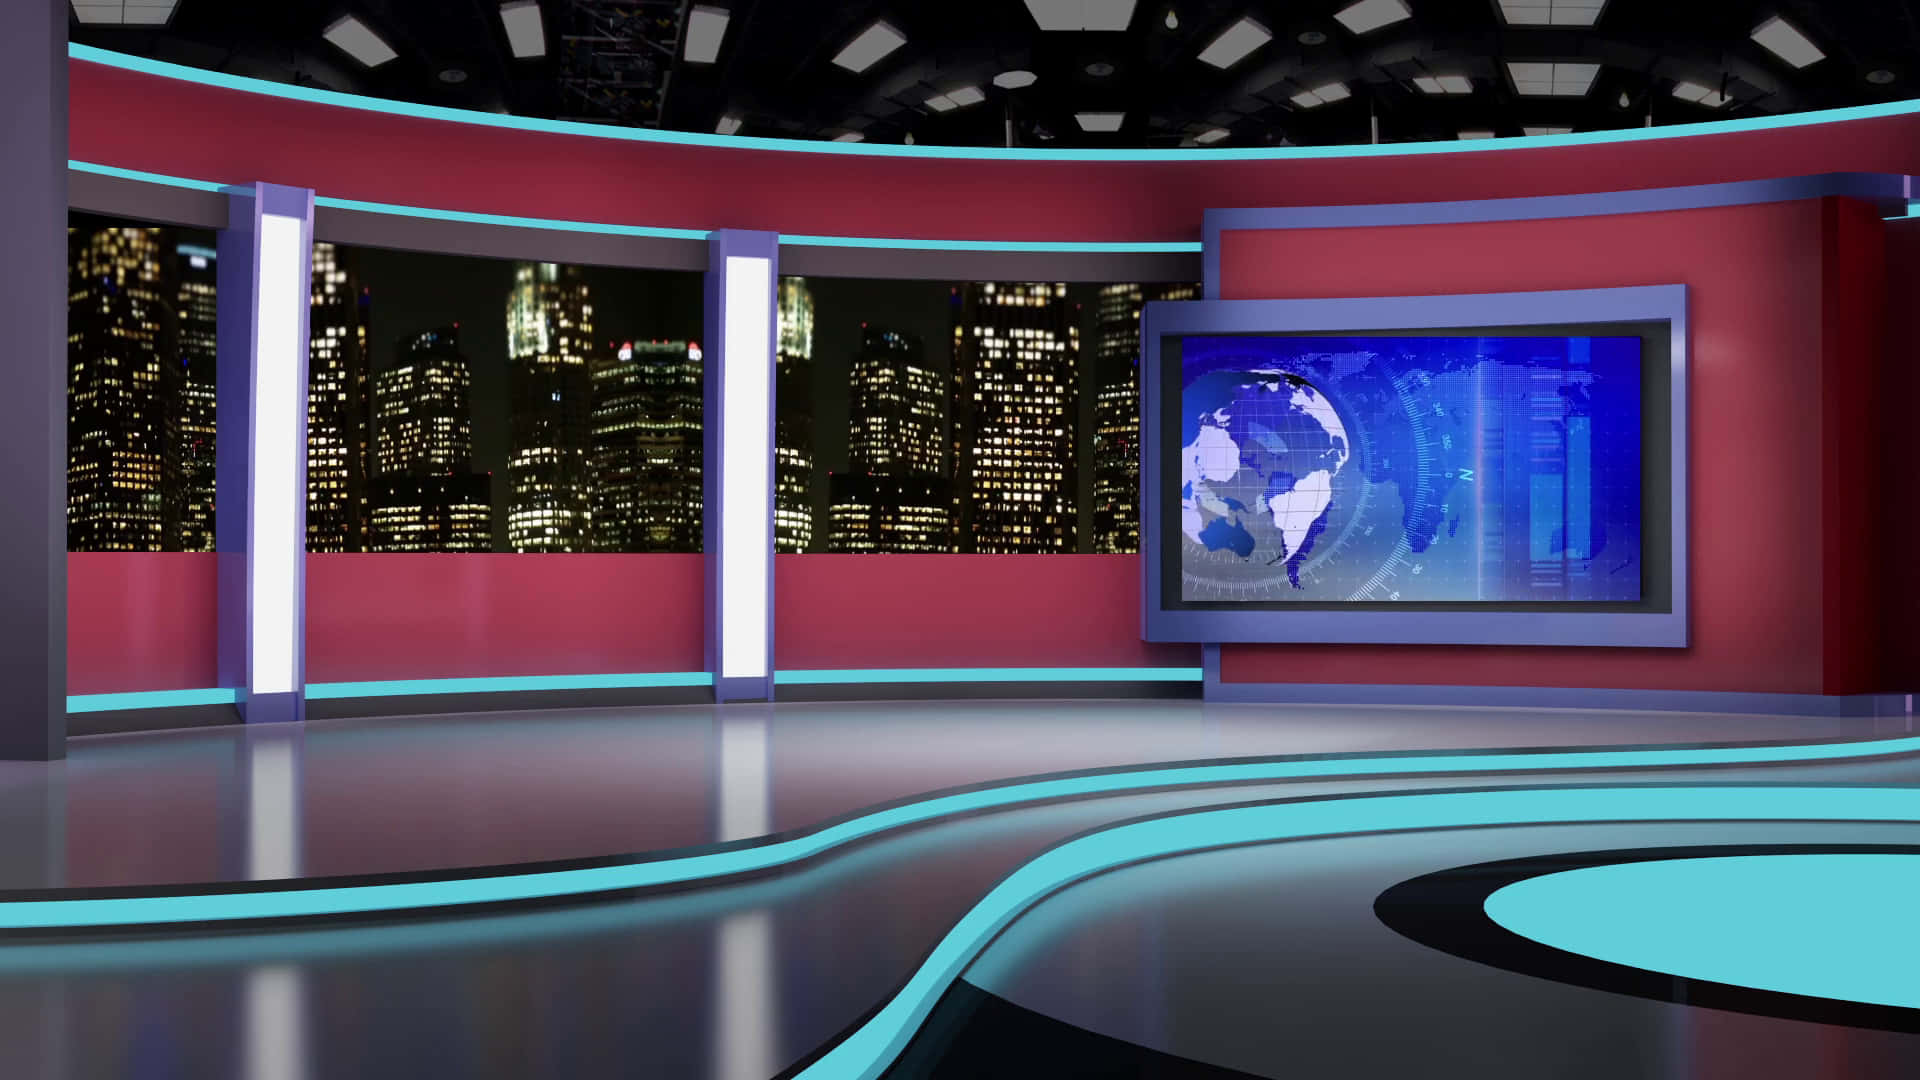 News Studio Anchor Ready to Broadcast